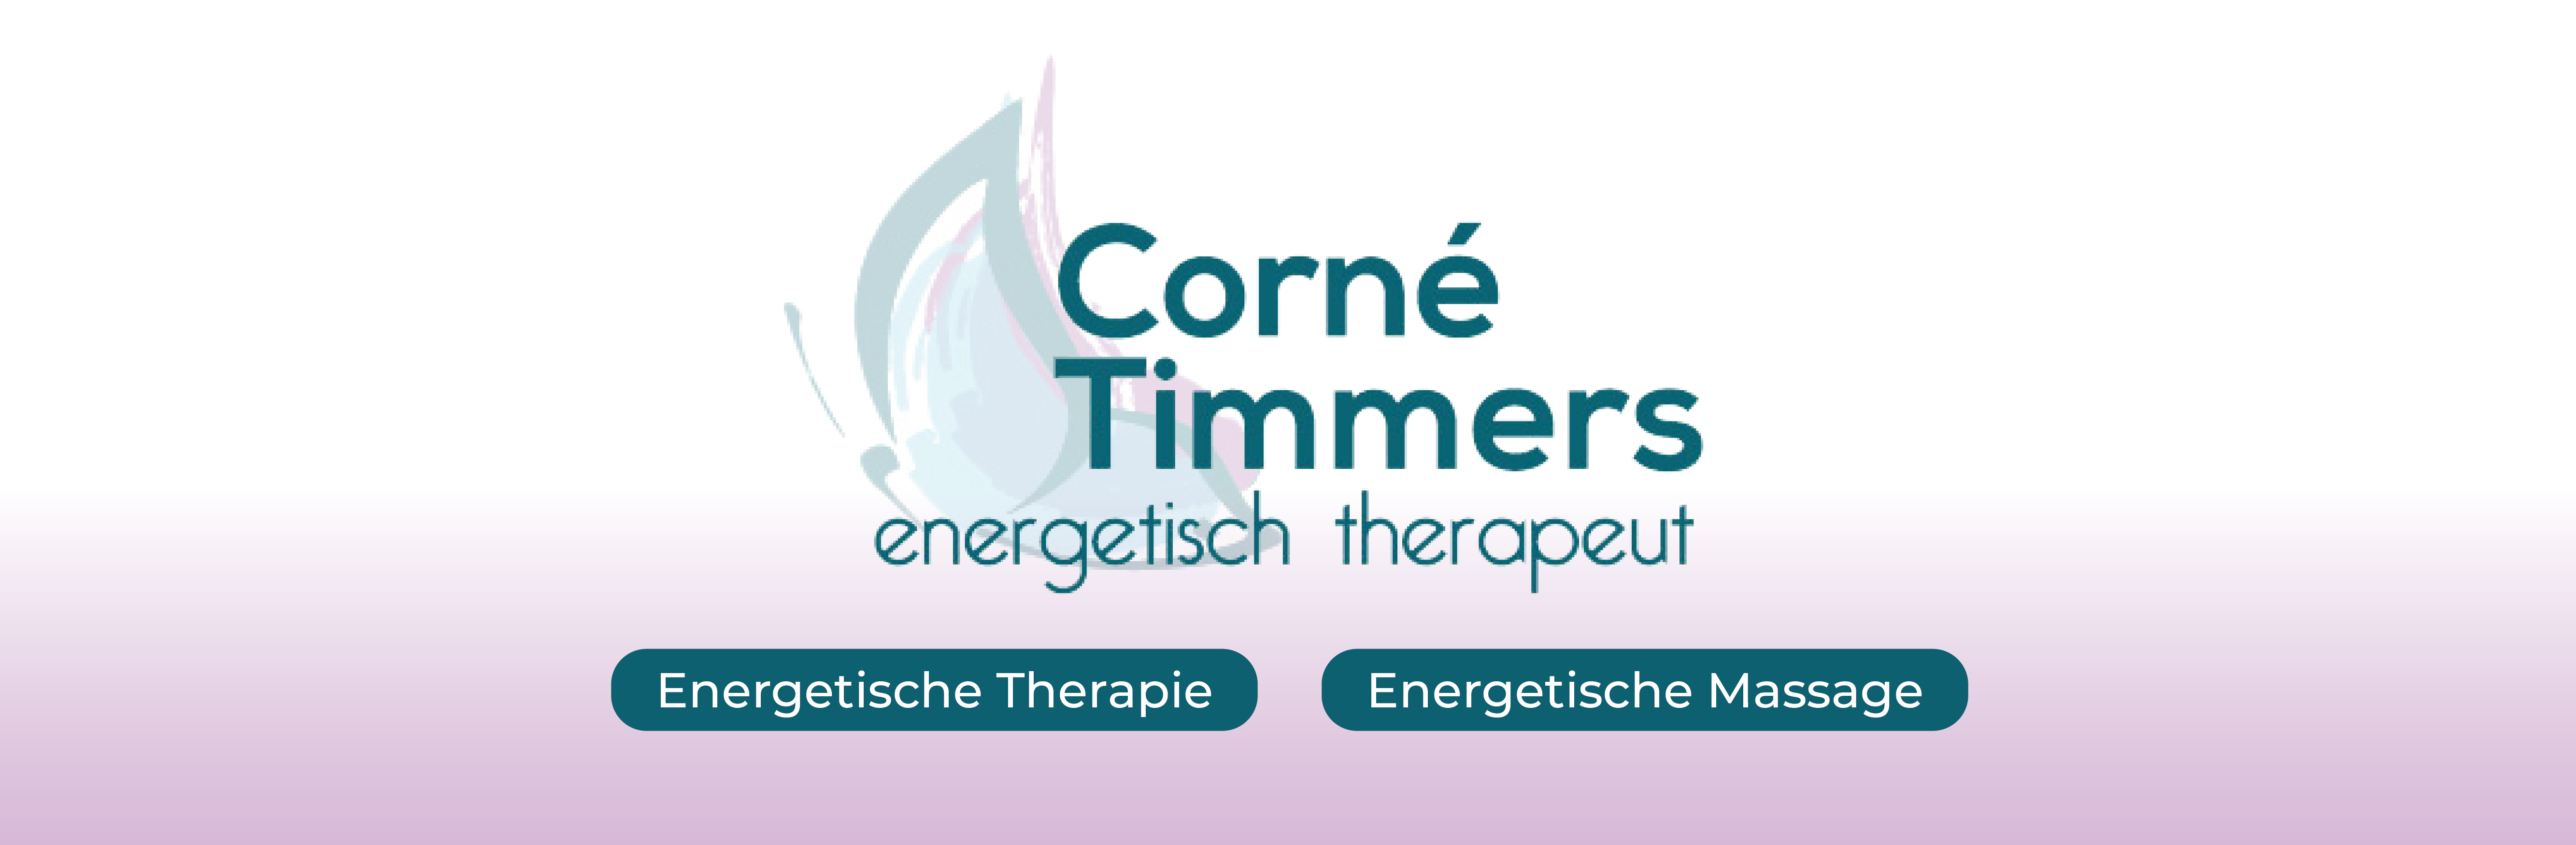 11098 Corné Timmers Energetisch therapeut 